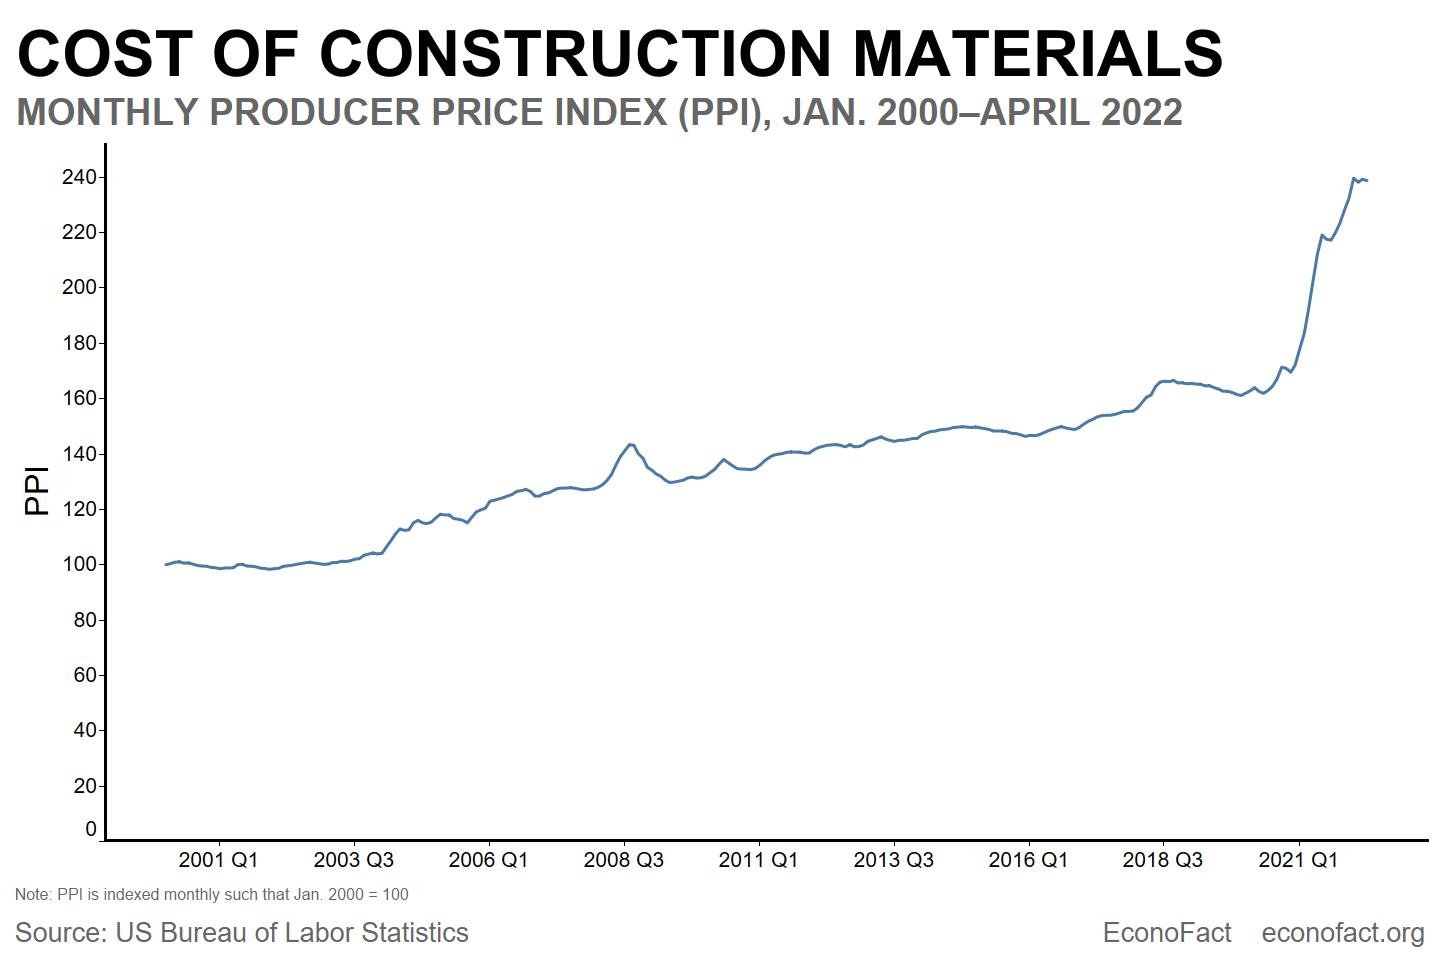 Cost of construction materials. Monthly producer price index (PPI) from January 2000 to April 2022. There is an overall upward trend in construction material cost, with a spike in the price around 2021.